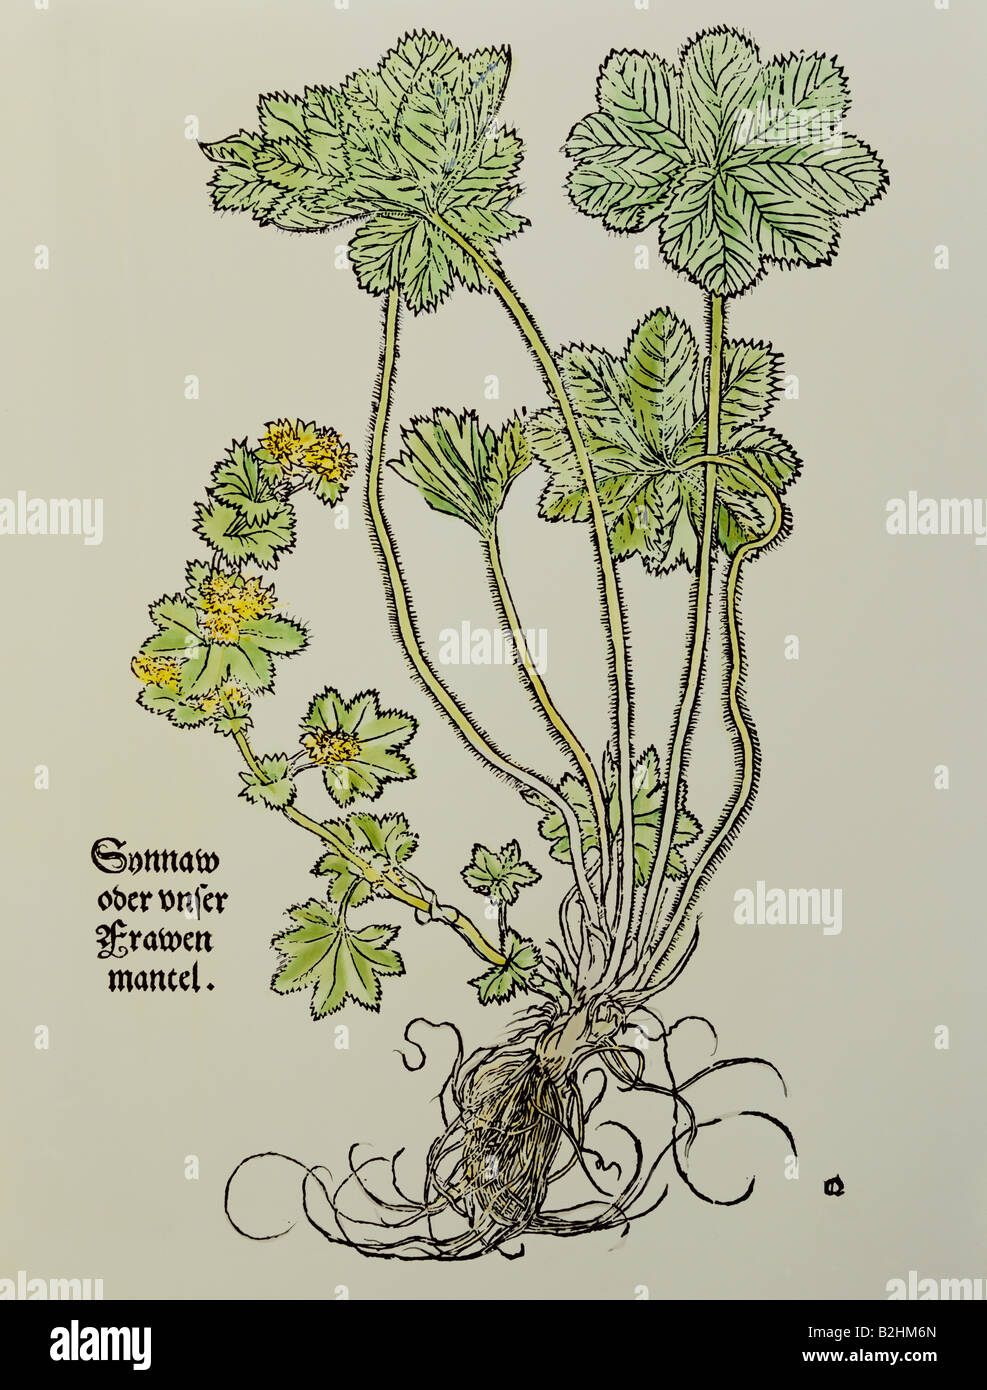 botany, herbs, lady`s mantle (Alchemilla), from 'Contrafayt Kreuterbuch' (Illustrated herbal book), by Otho Brunfels (1489 - 1534), woodcut, coloured, by Hans Weidnitz, Strasbourg, Germany, 1532, Stock Photo